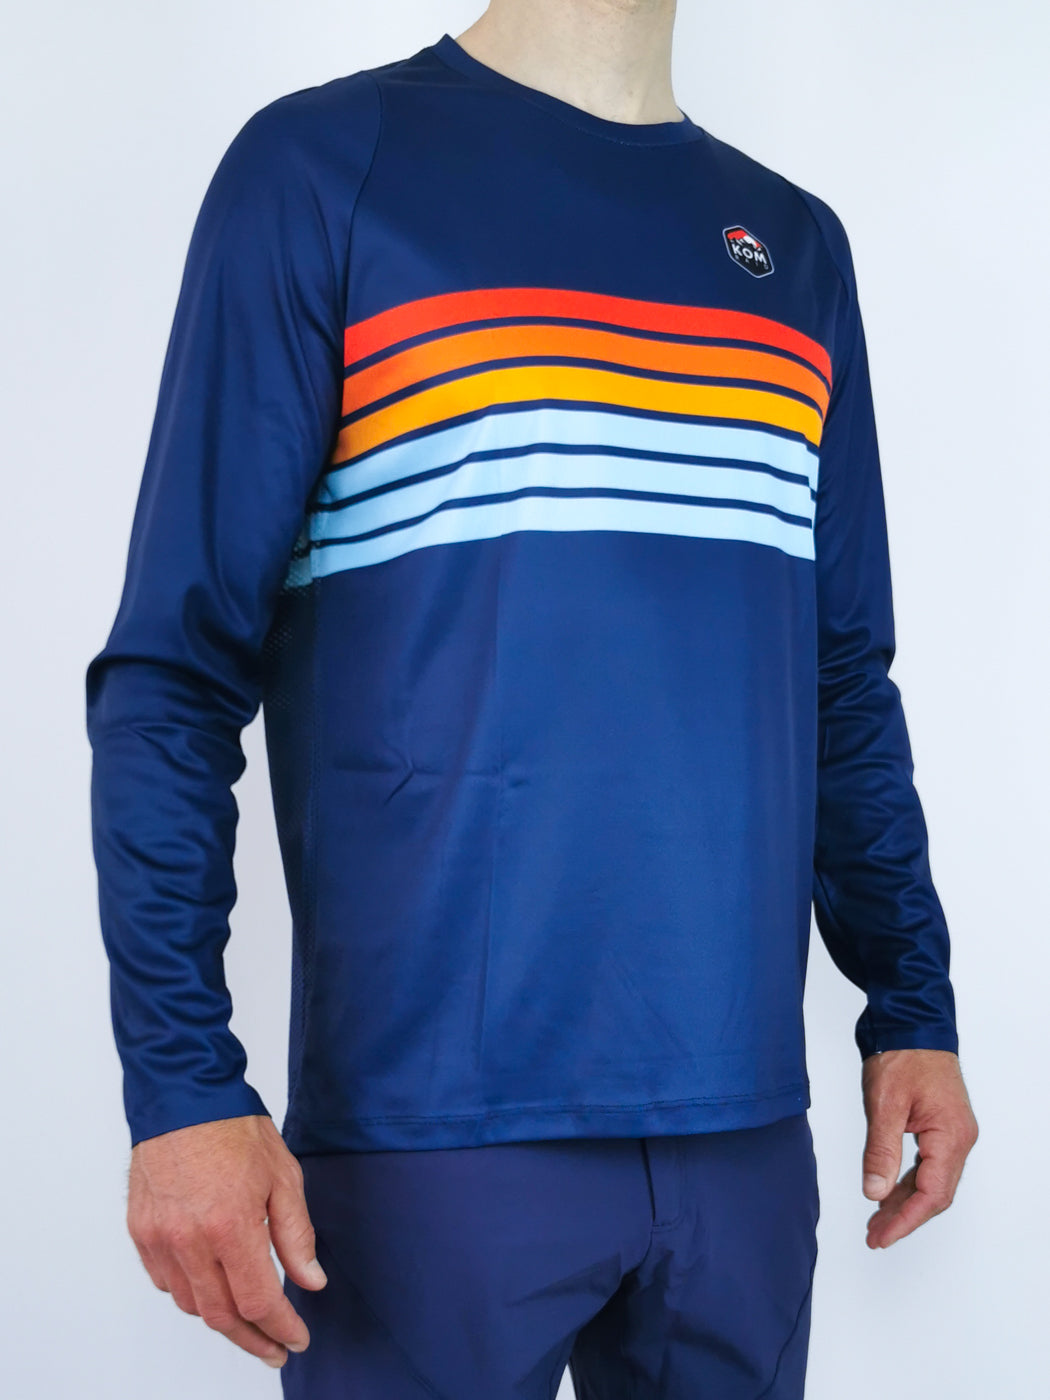 Whistler Grit Off-Road Jersey